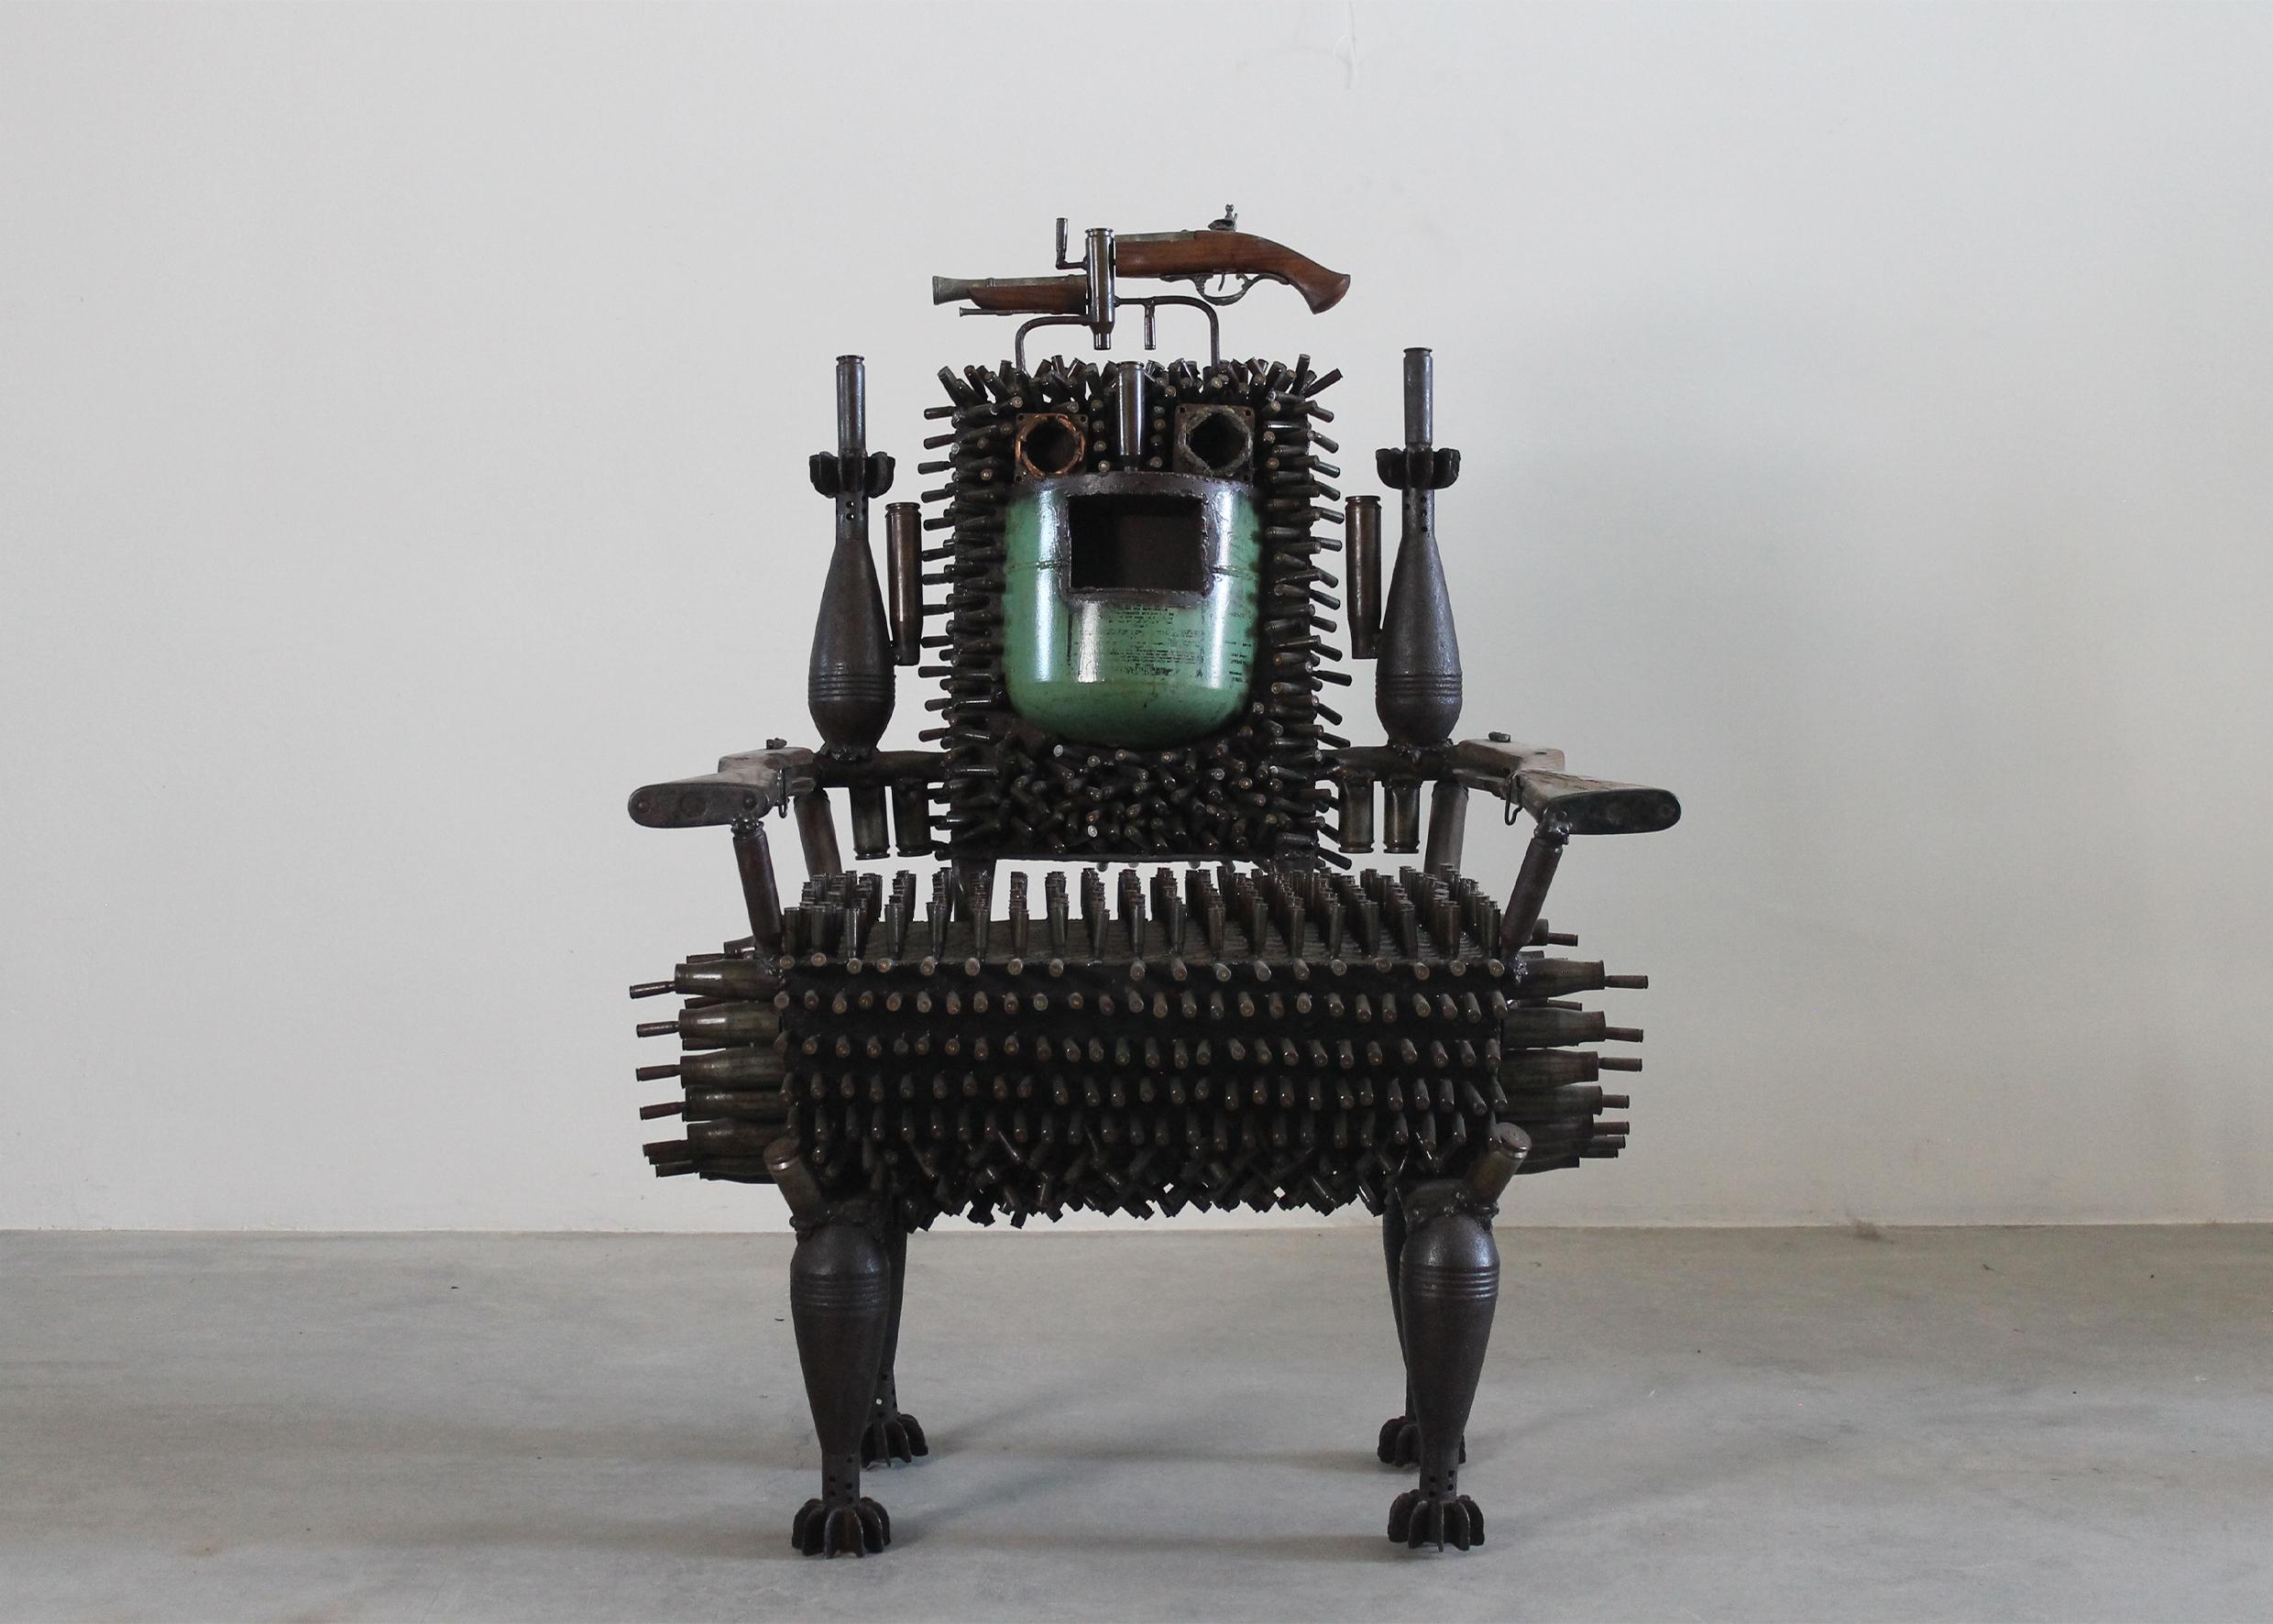 The extraordinary talented throne (2018), a unique artwork by Gonçalo Mabunda in metal scraps and decommissioned ammunitions.
Mabunda was born in 1975, in Maputo, Mozambique. He will represent his country at the Mozambique Pavilion at the upcoming